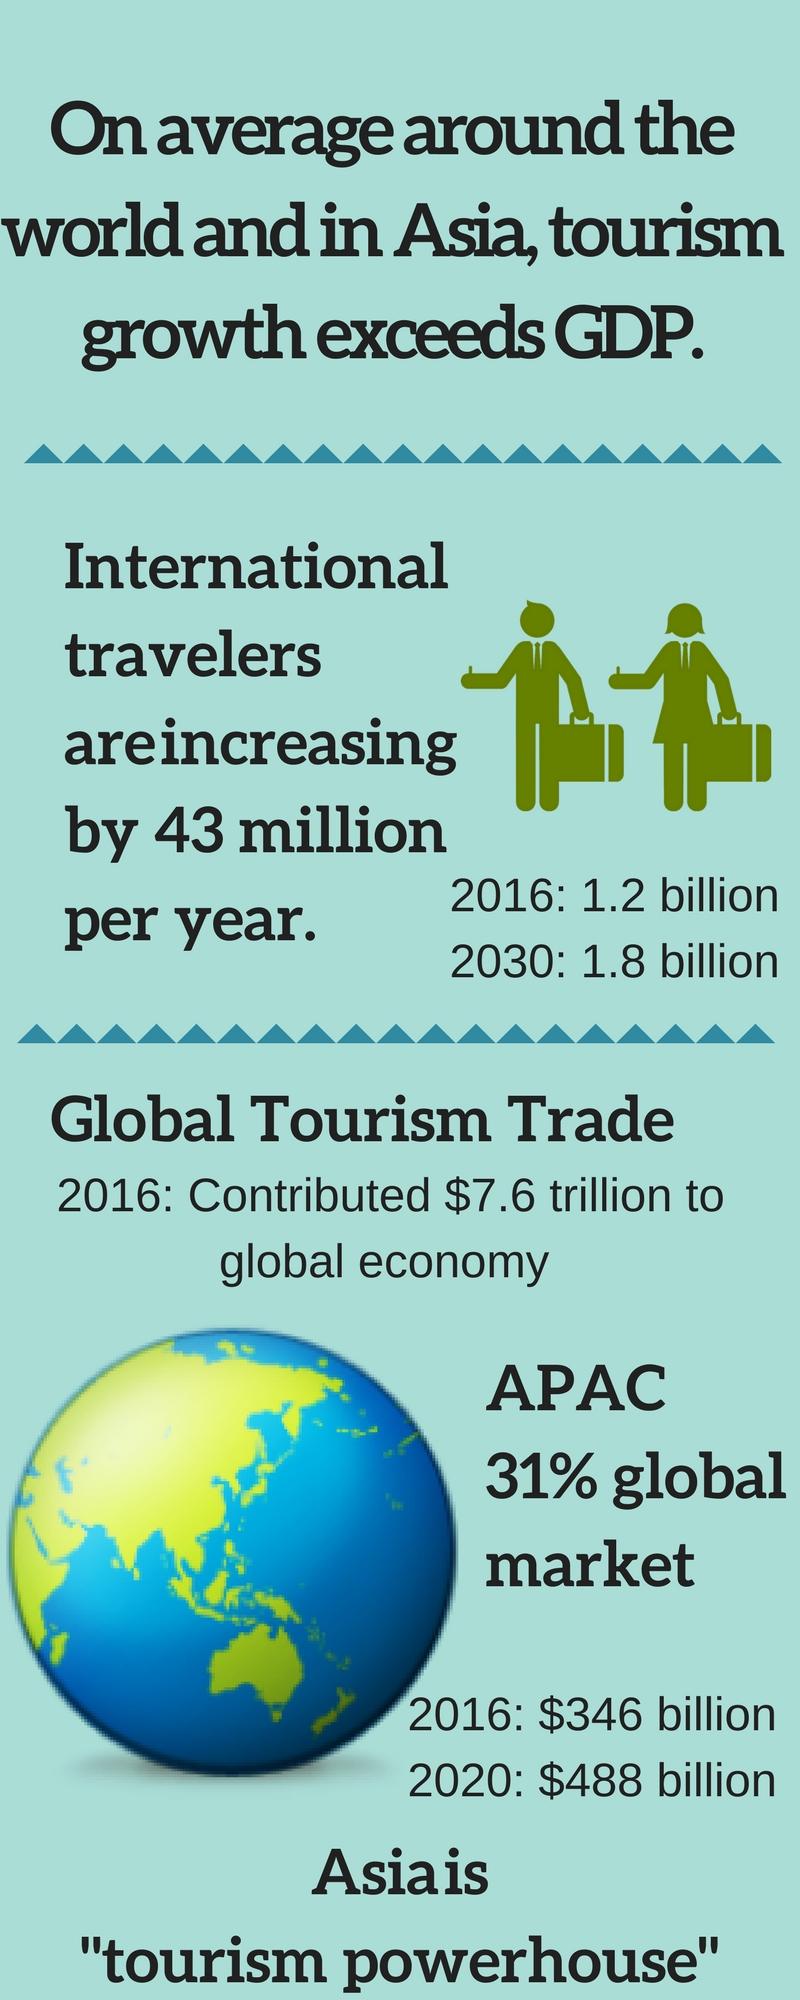 Phocuswright, a global travel market research firm, predicts that by 2020 the value of the APAC market will reach US $488 billion.